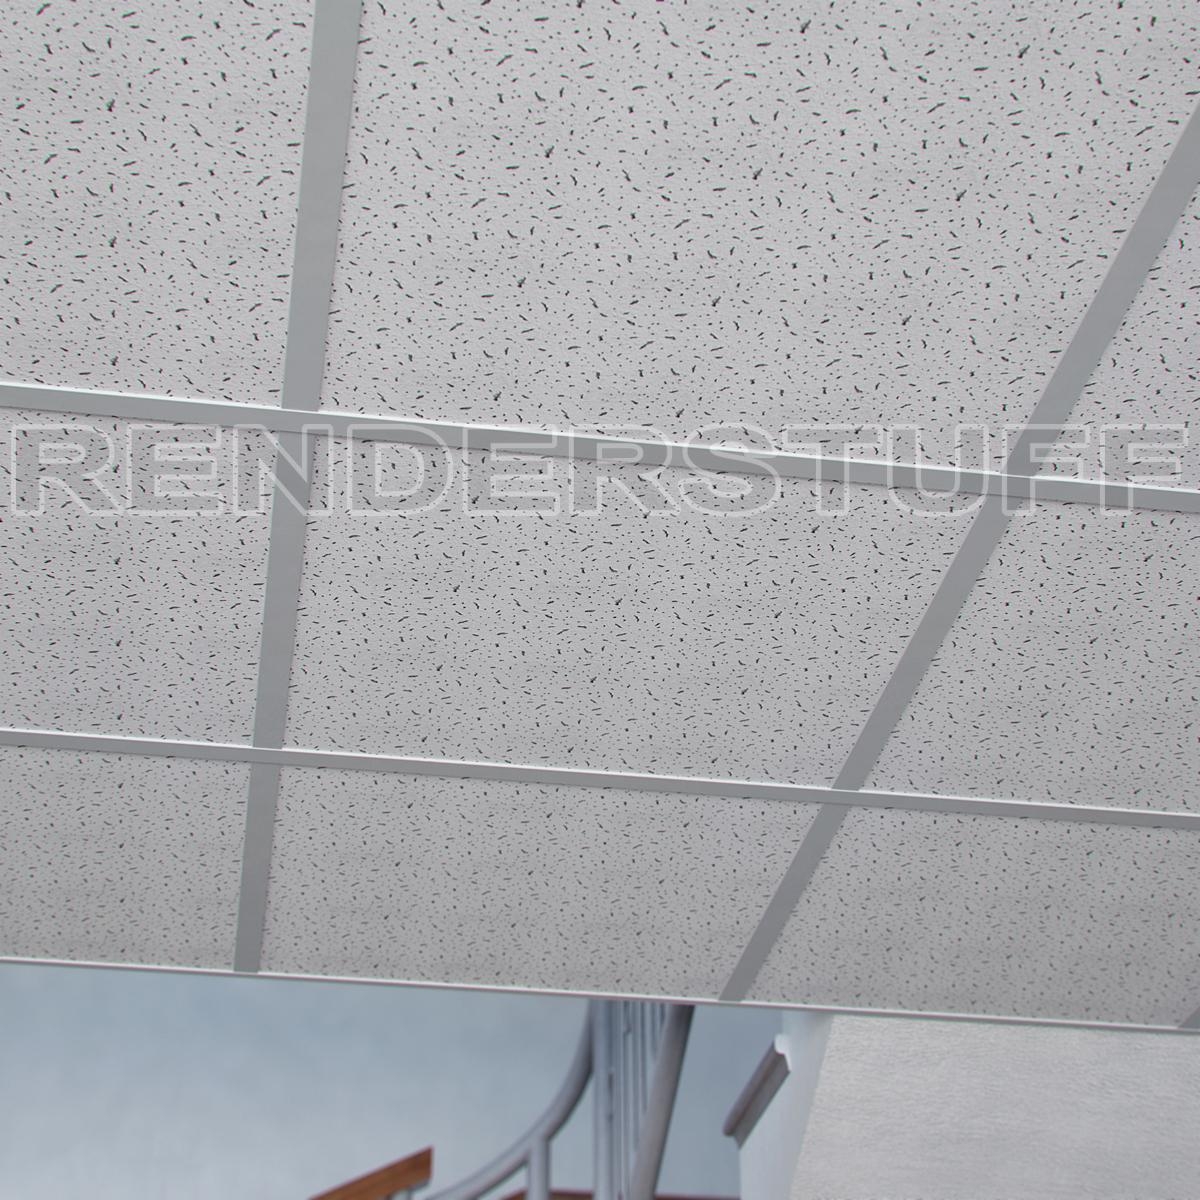 Armstrong 3d Ceiling Tilesvwartclub armstrong suspended ceiling